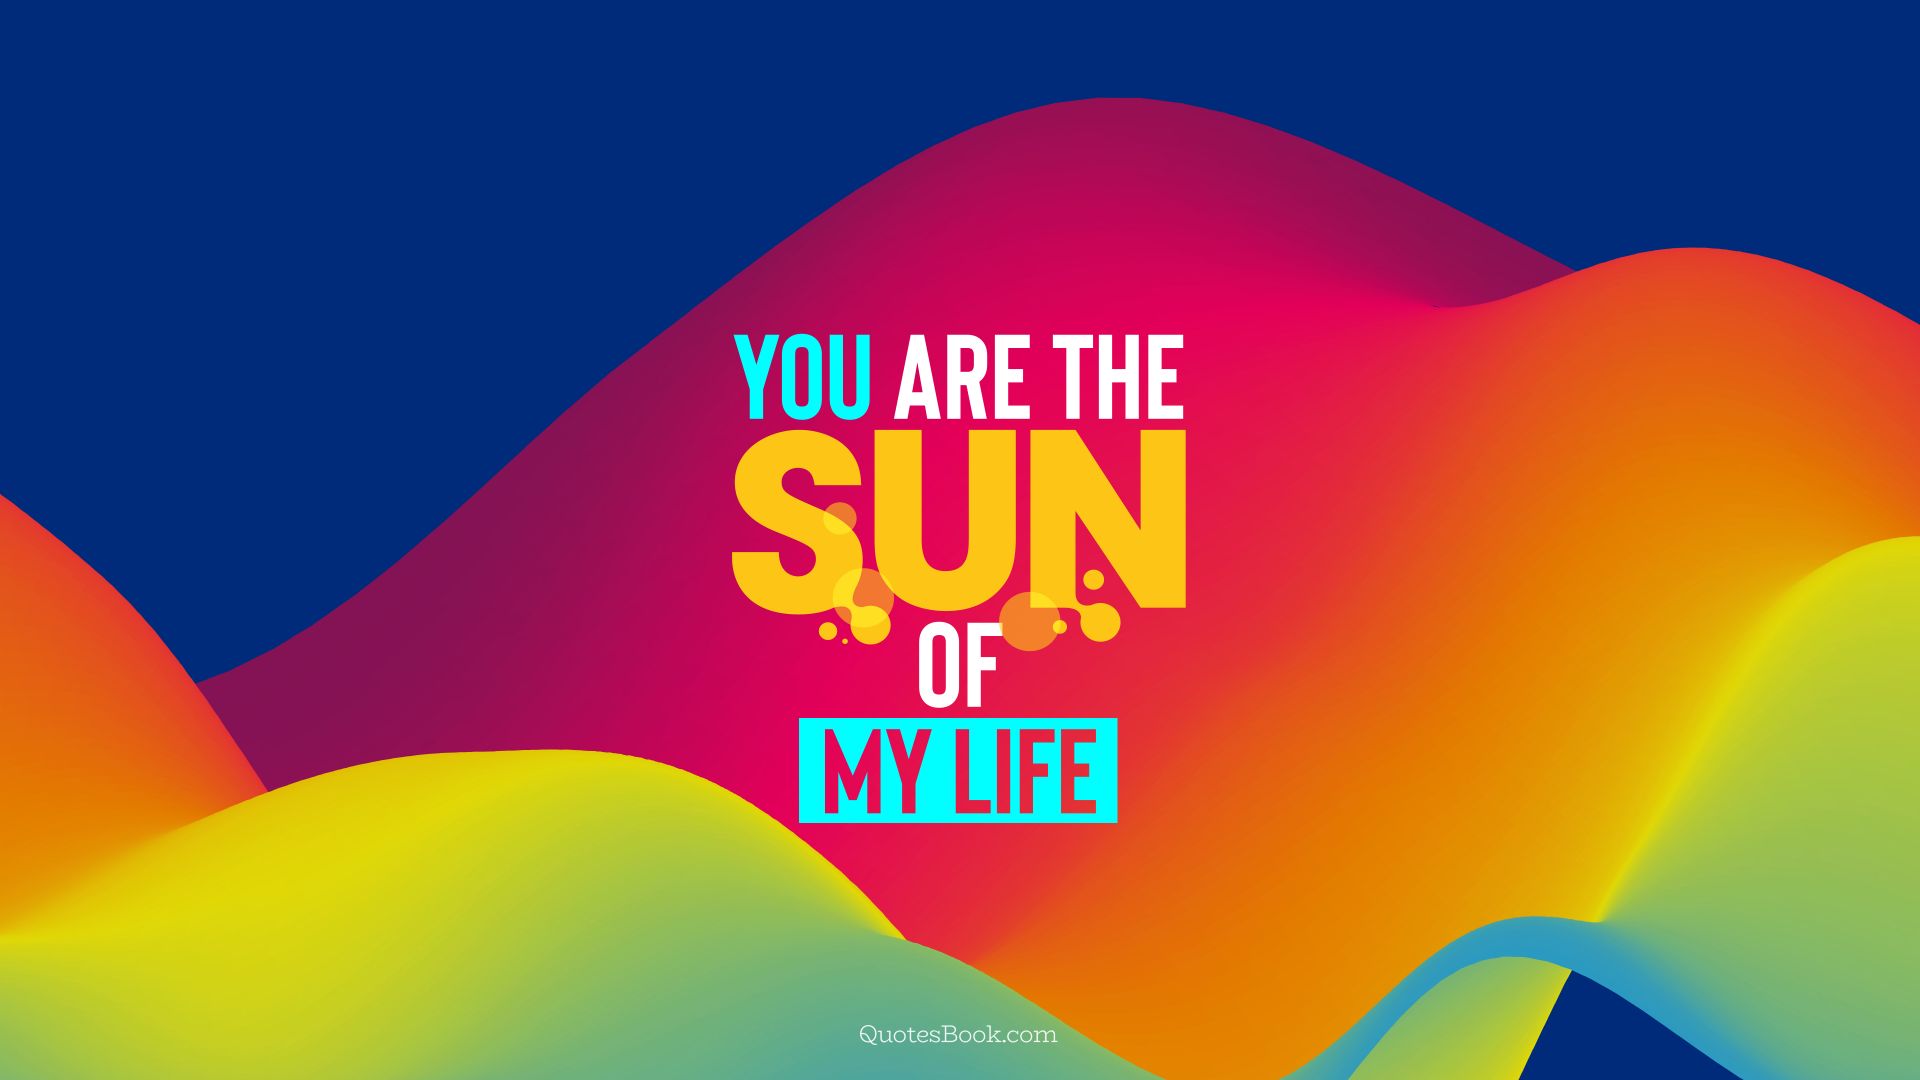 You are the sun of my life. - Quote by QuotesBook